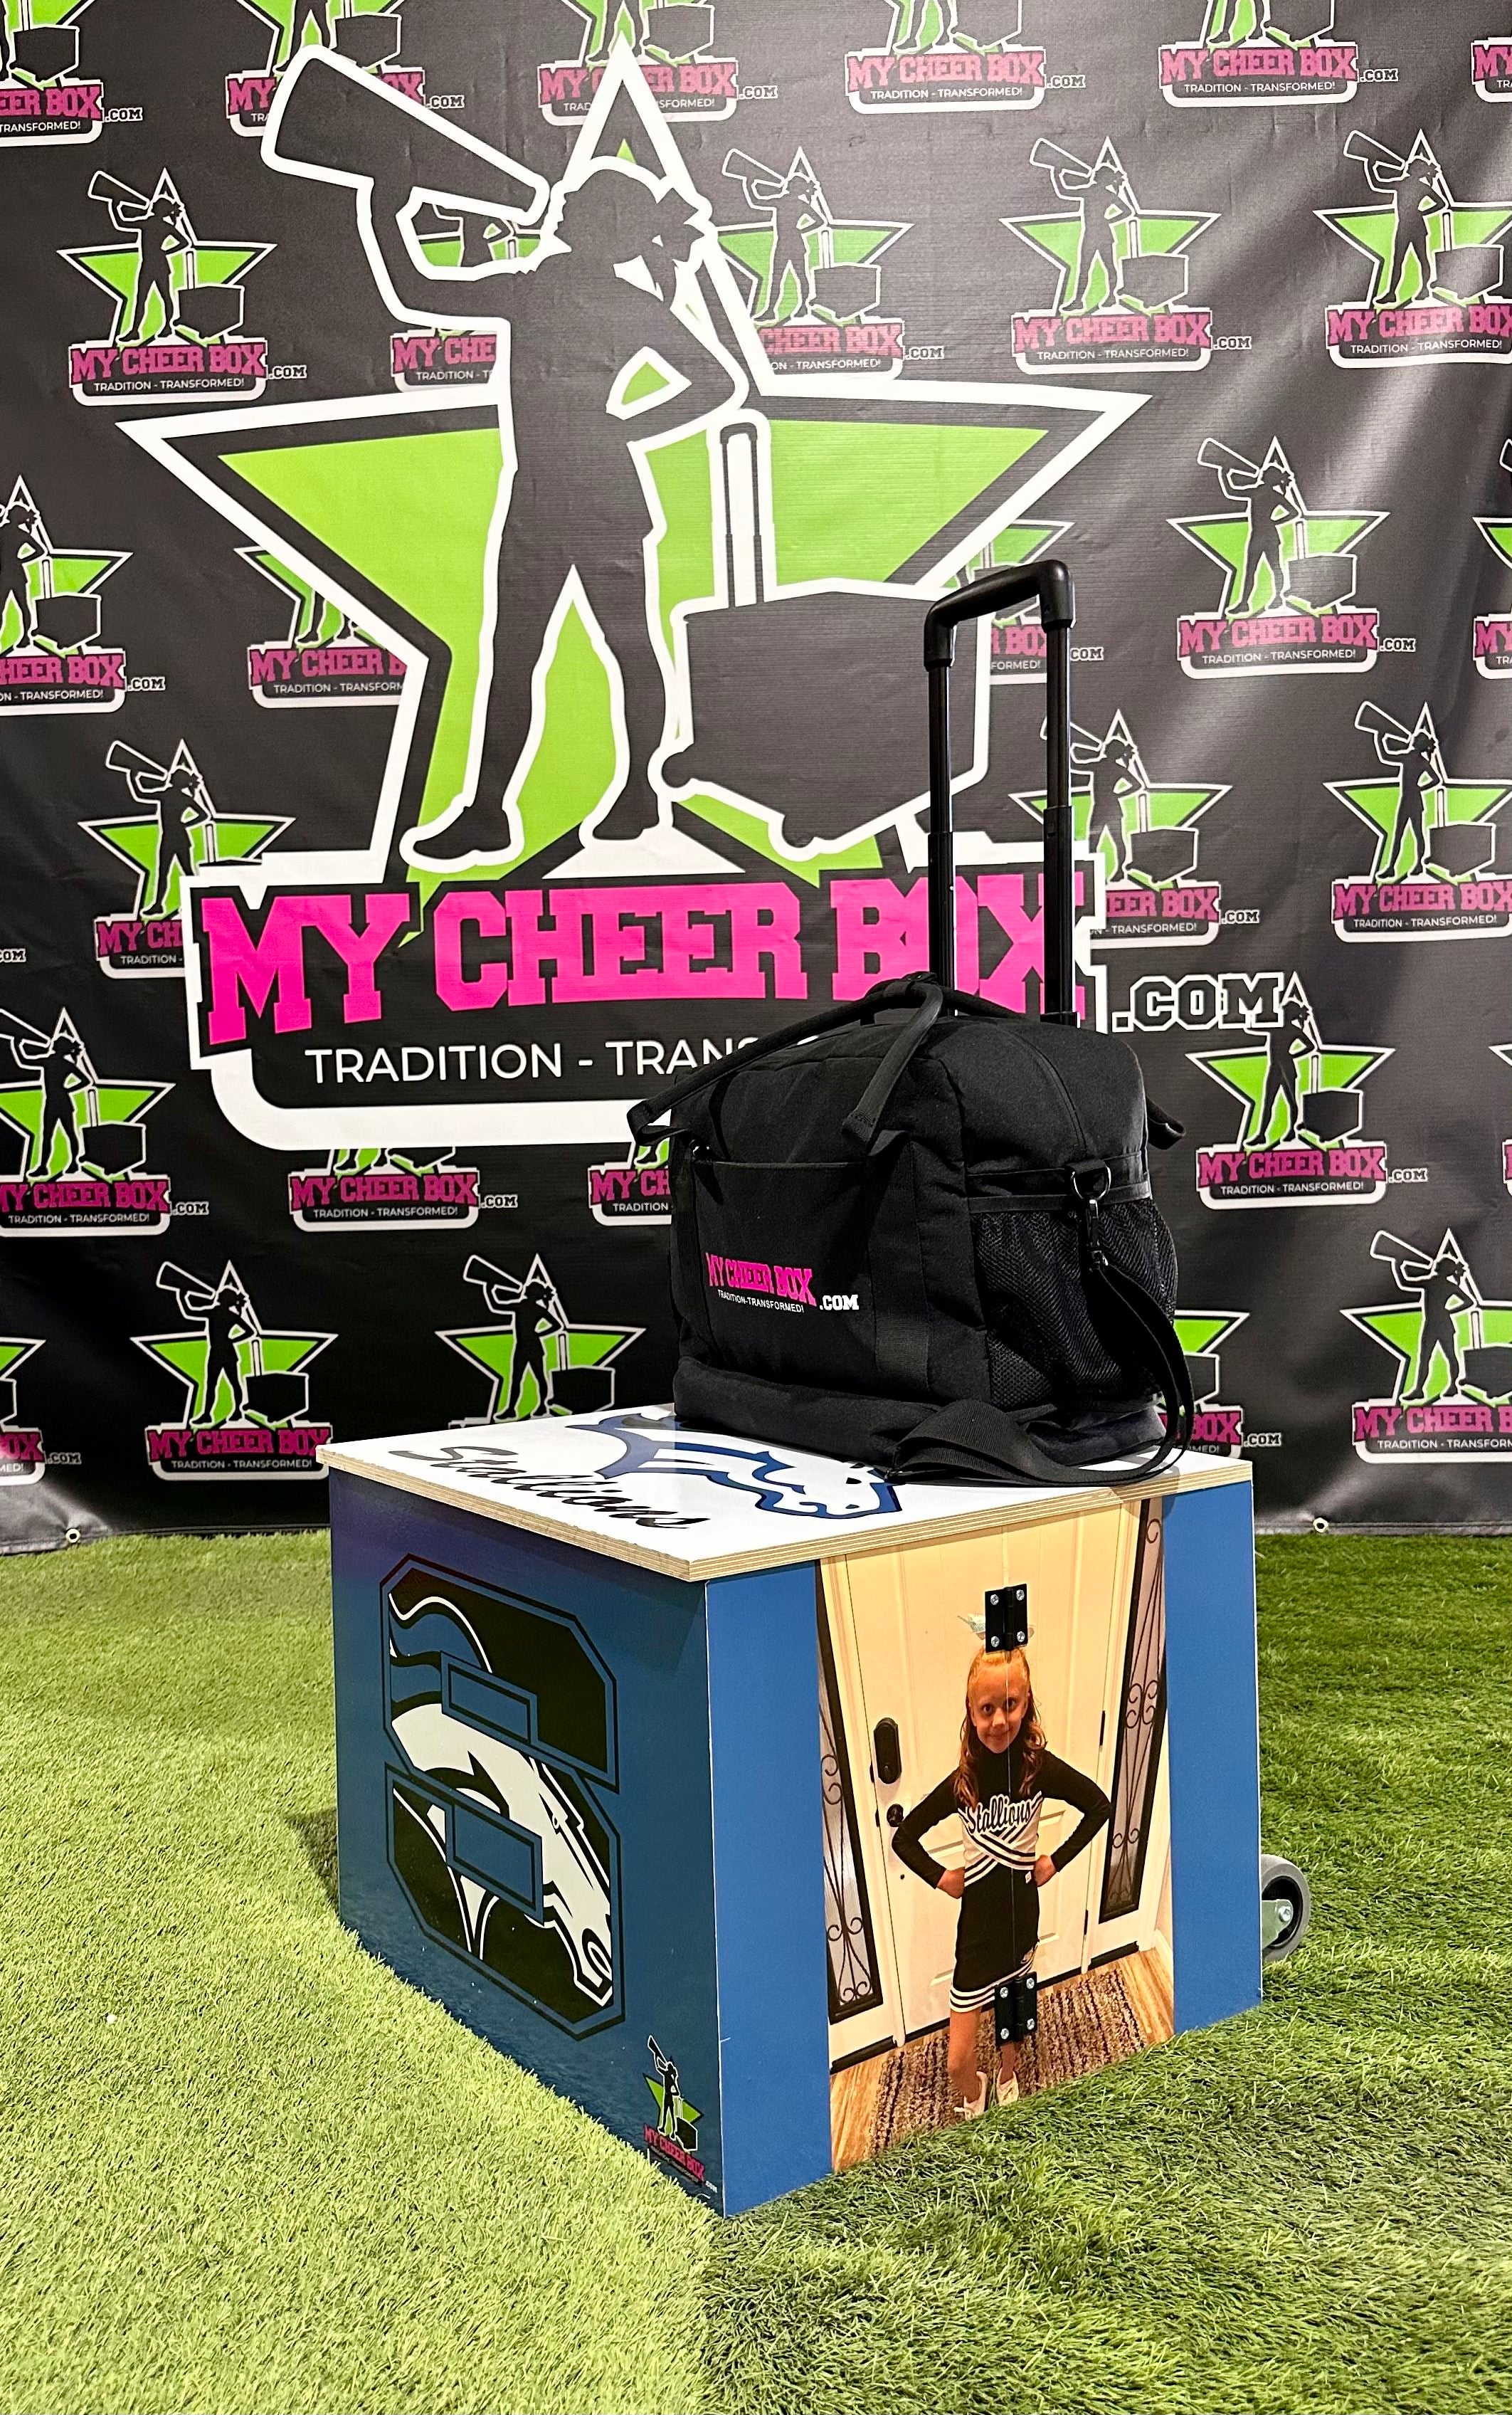 Youth Size Elite Box (Customizable) | Two SidesYouth Size Elite Box (Customizable)
Youth Size Elite Cheer Box – Comes with customizable exterior design and every accessory offered by My Cheer Box. (Cheer bag sold separately) MCB Cheer Box Bag – My